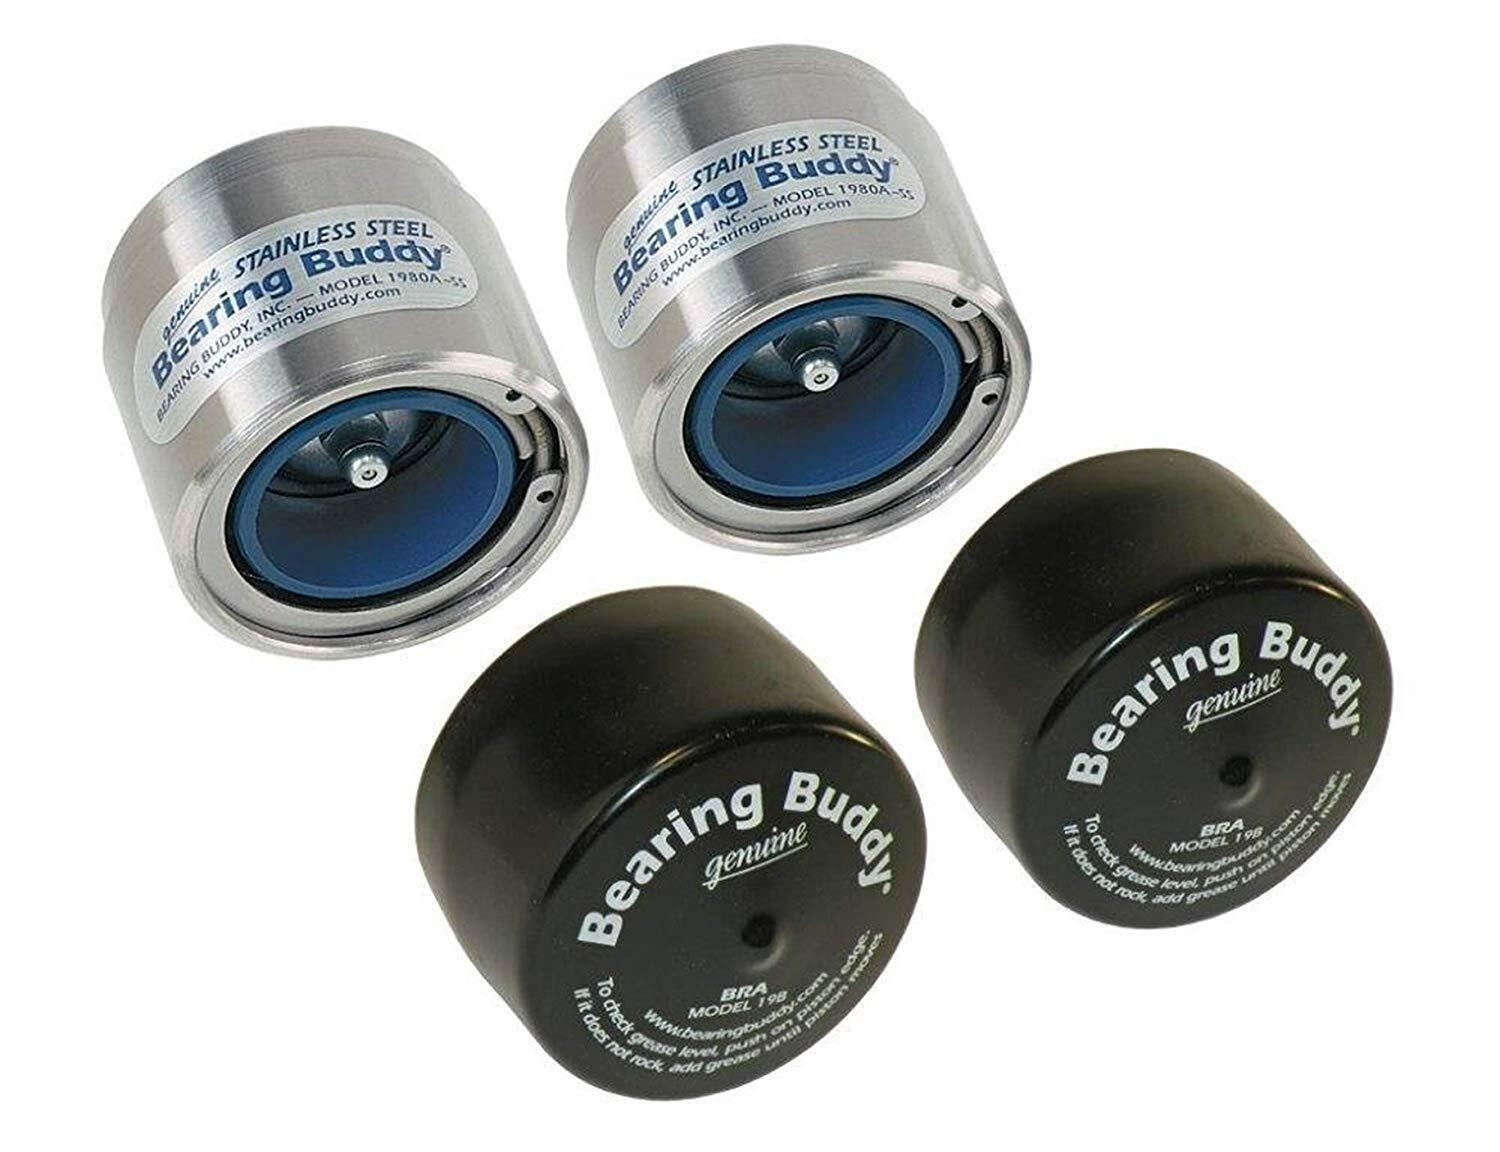 Bearing Buddy Stainless Steel SS w/ Protective Bra Boat Trailer 1.980\